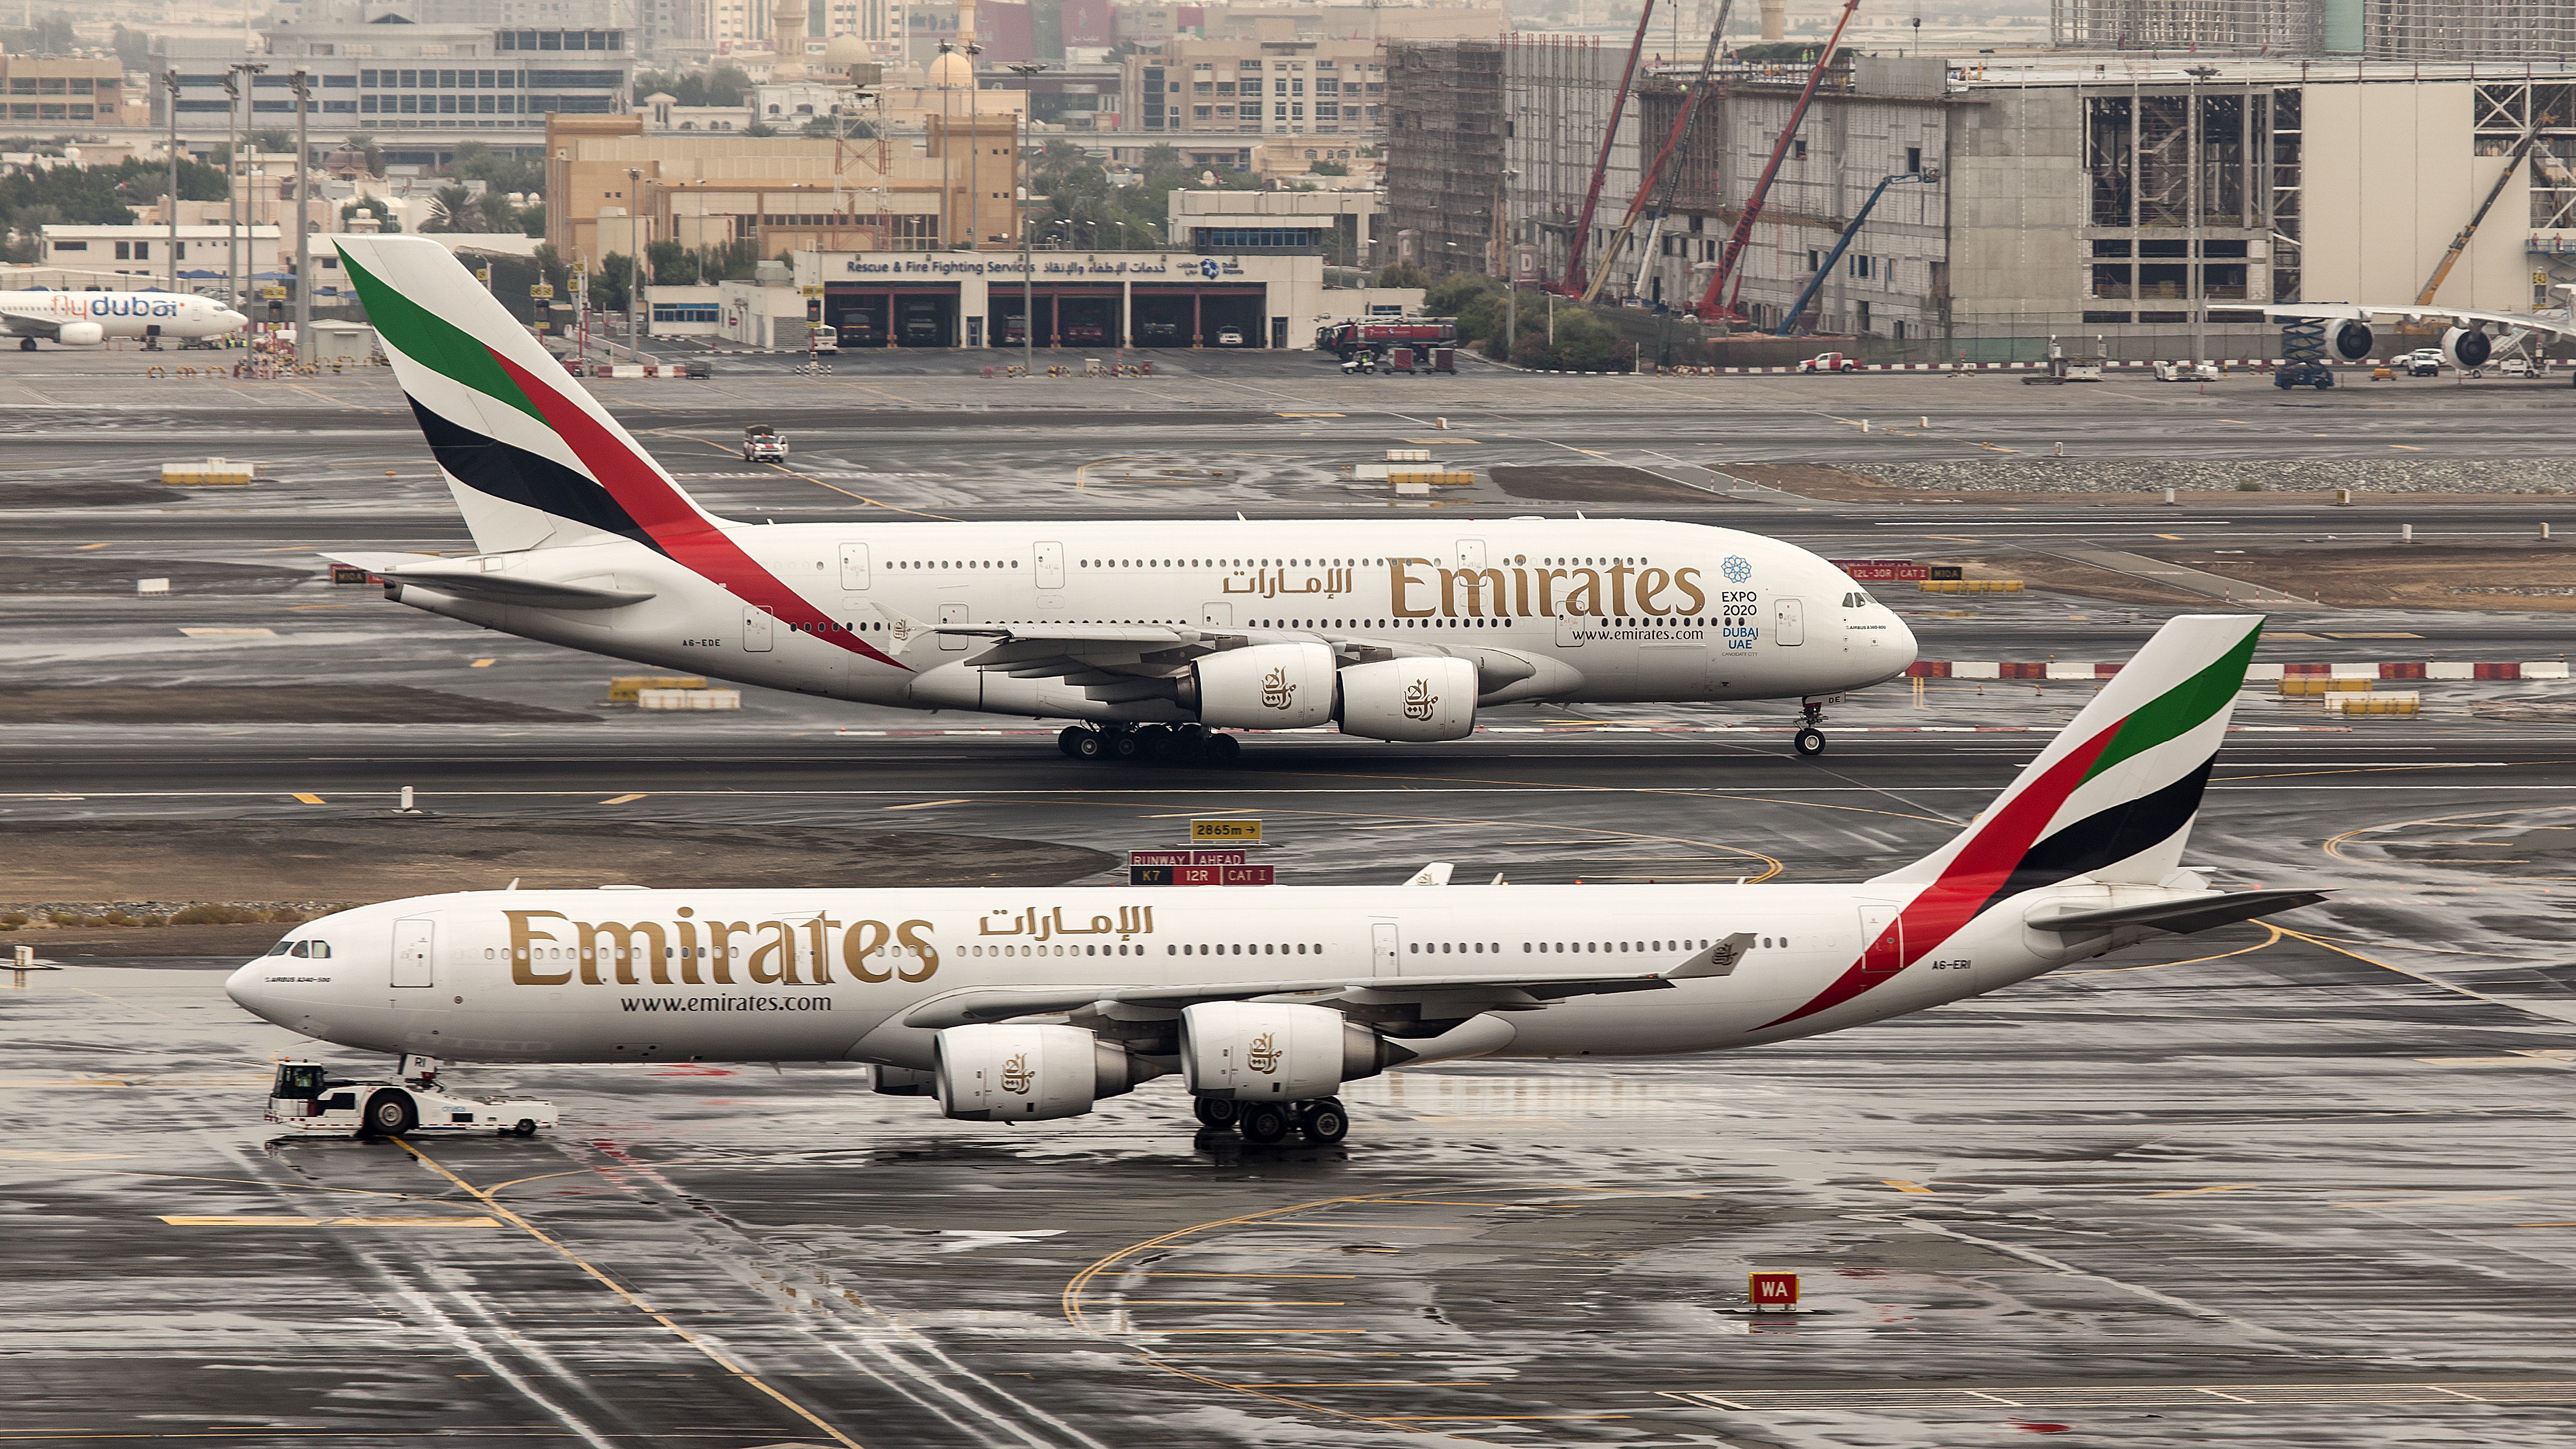 Emirates Airbus A340 Taxiing Past A380 In Dubai